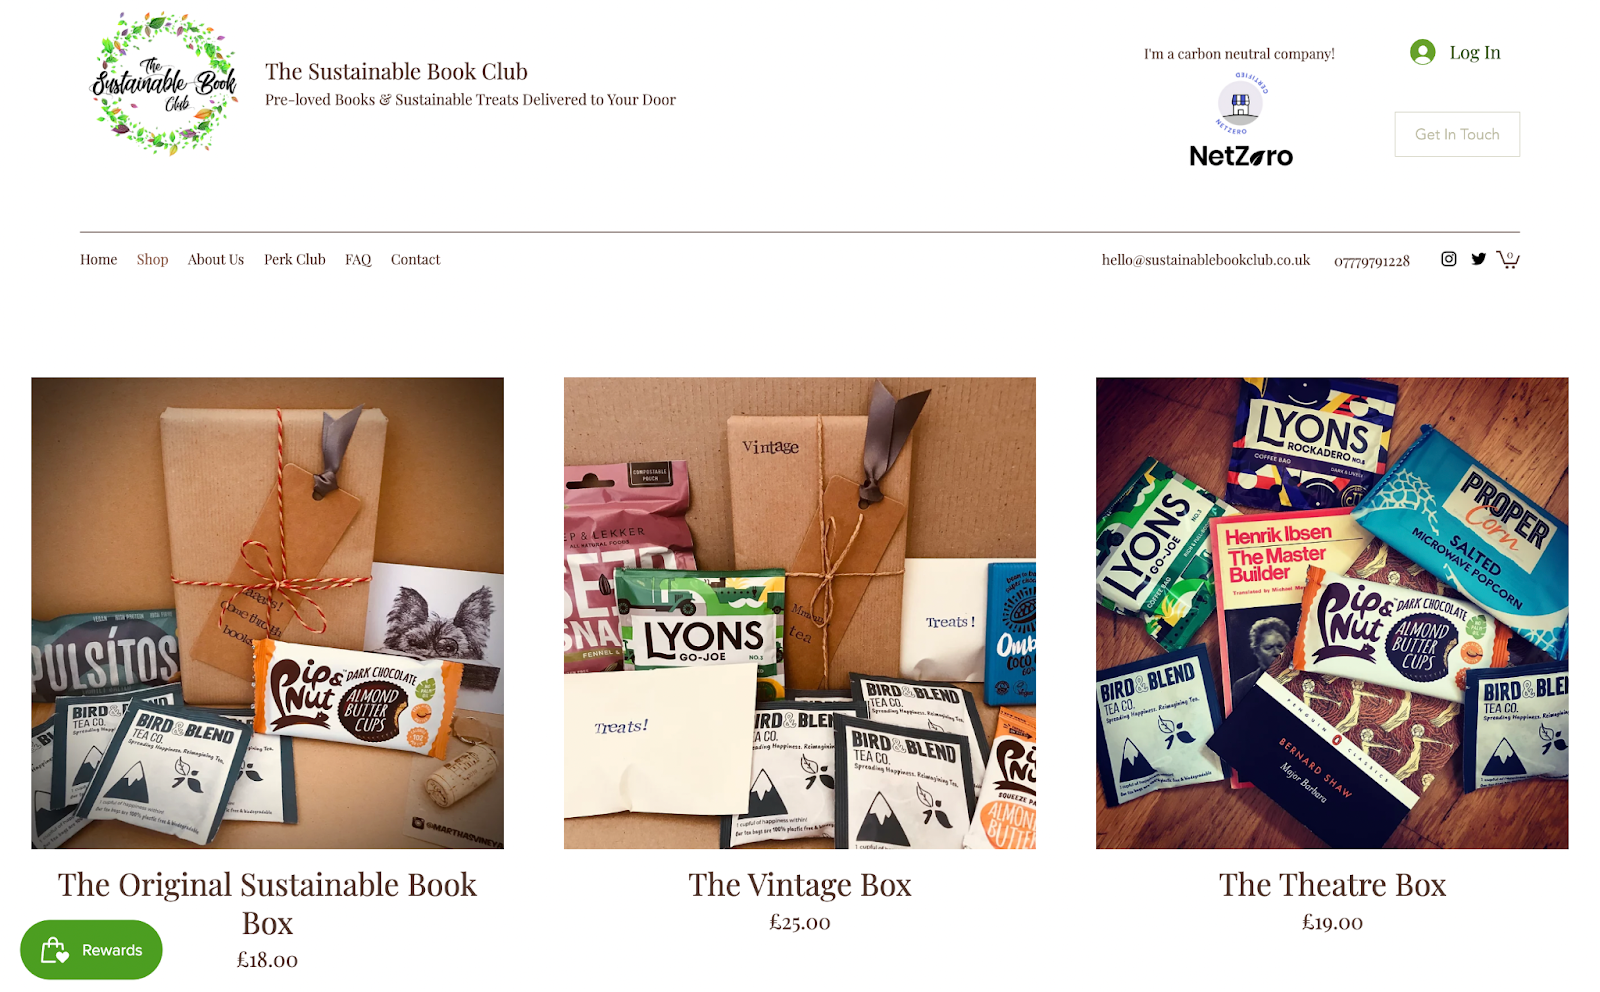 Sustainable brands–A screenshot of The Sustainable Book Club’s subscription box page showing The Original Sustainable Book Box, The Vintage Box, and The Theatre Box with pictures of each.